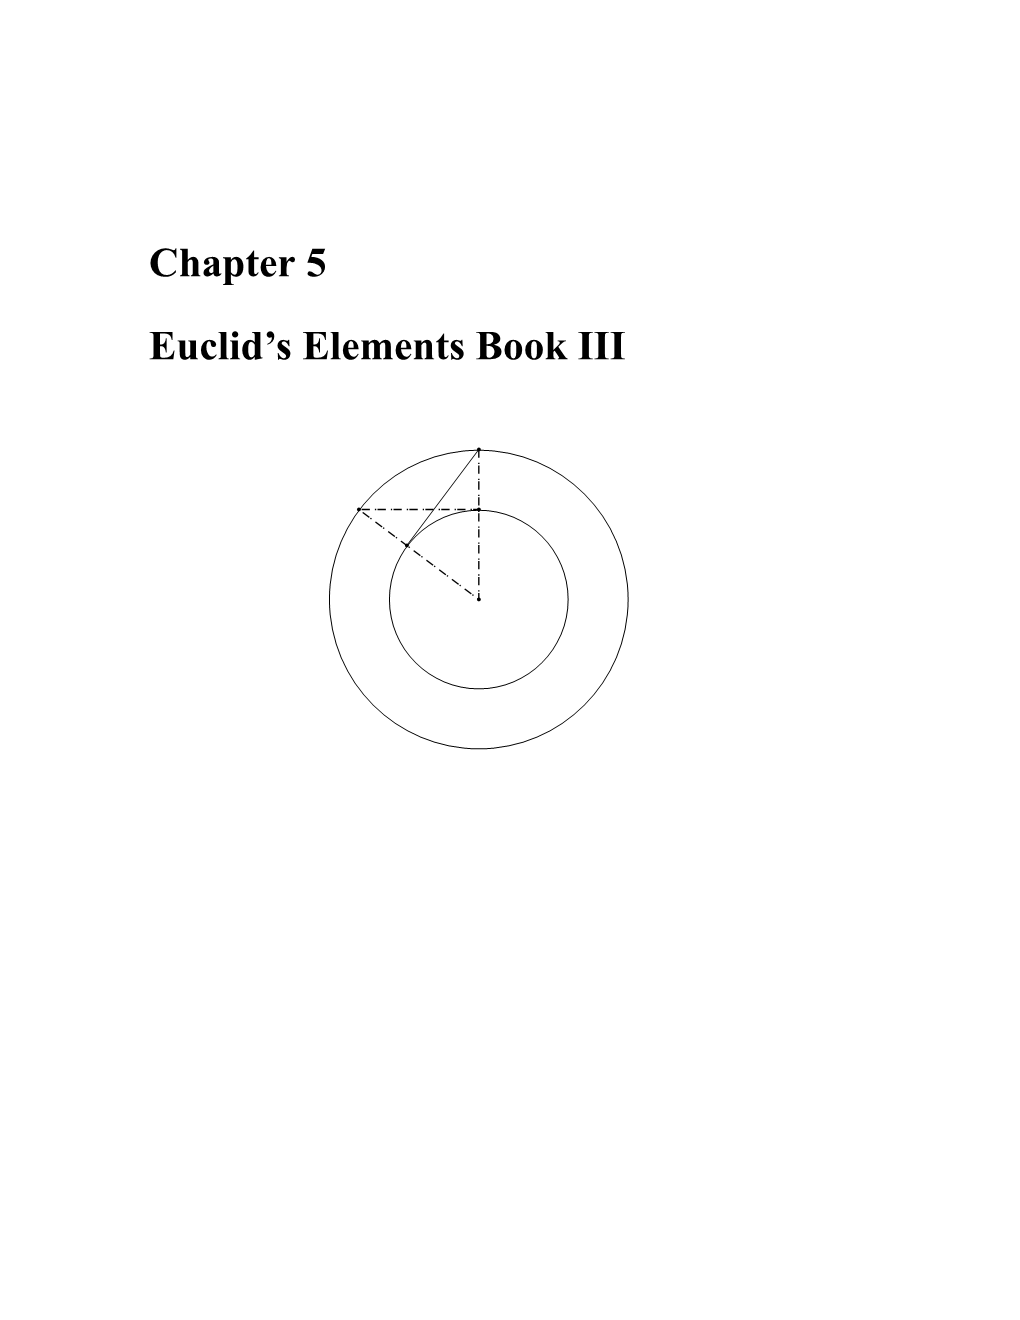 Chapter 5 Euclid's Elements Book